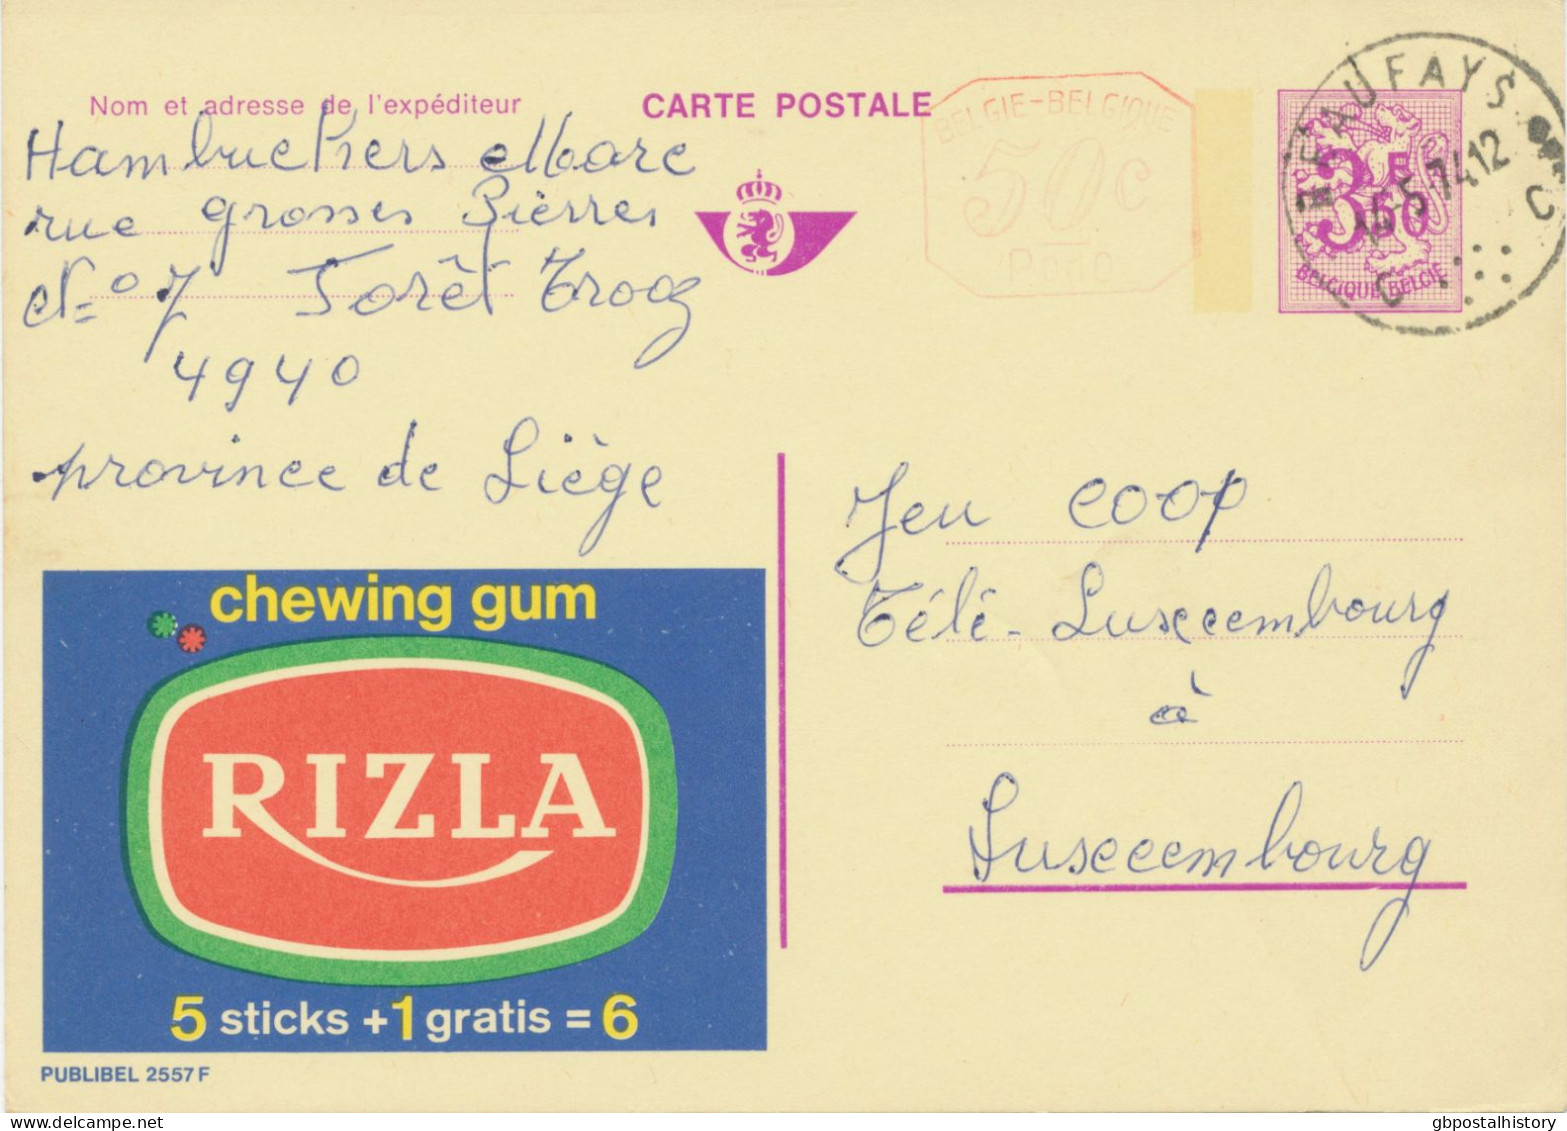 BELGIUM VILLAGE POSTMARKS  BEAUFAYS C (now Chaudfontaine) SC With Dots 1974 (Postal Stationery 3,50 + 0,50 F, PUBLIBEL 2 - Annulli A Punti